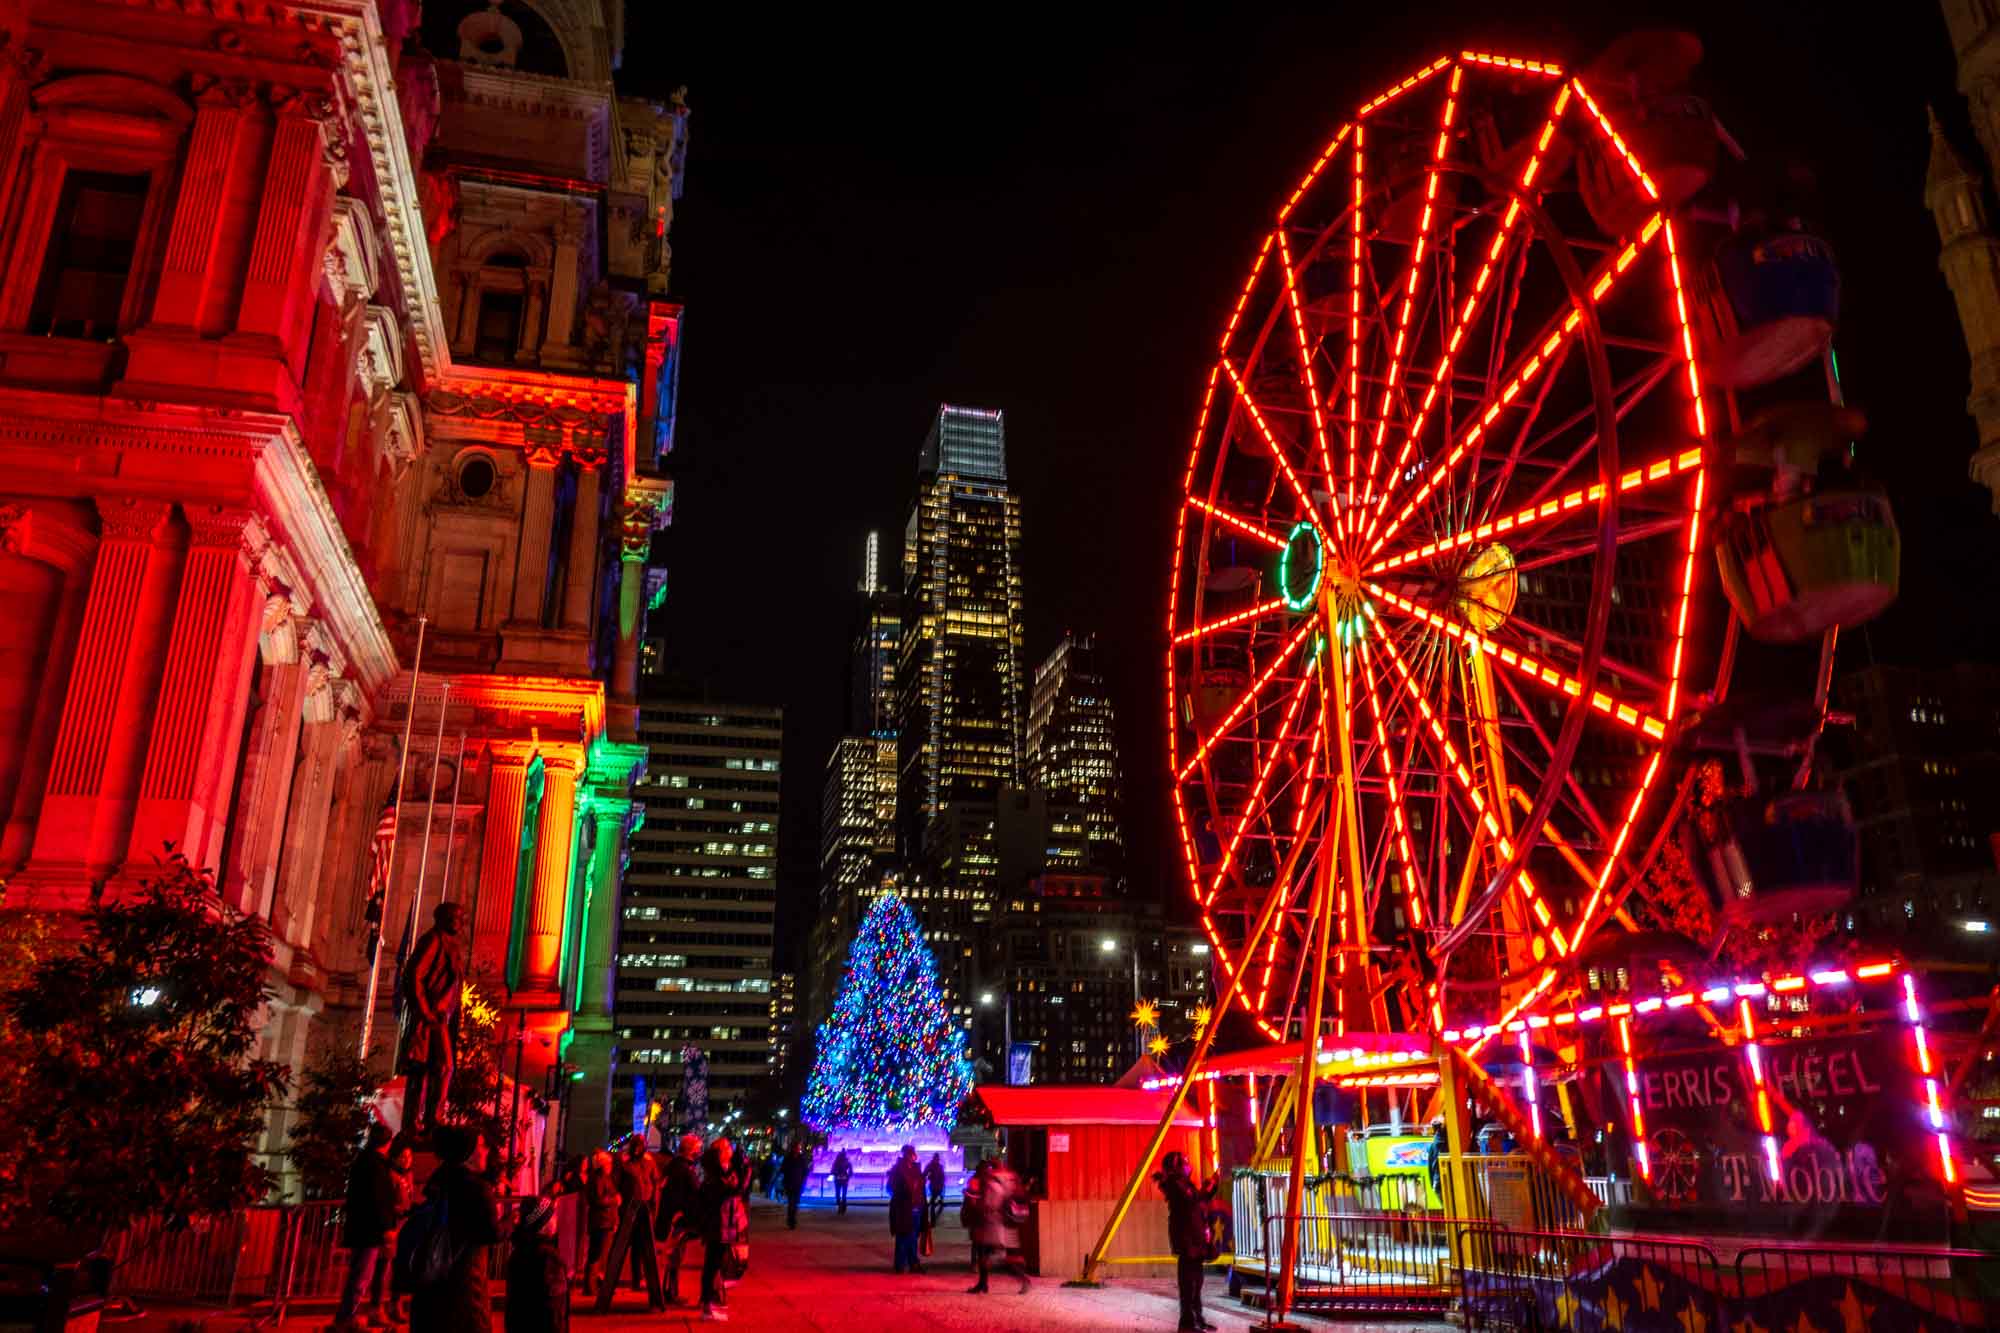 Ferris wheel lit up with red lights at night with a lit up Christmas tree and city buildings in the background